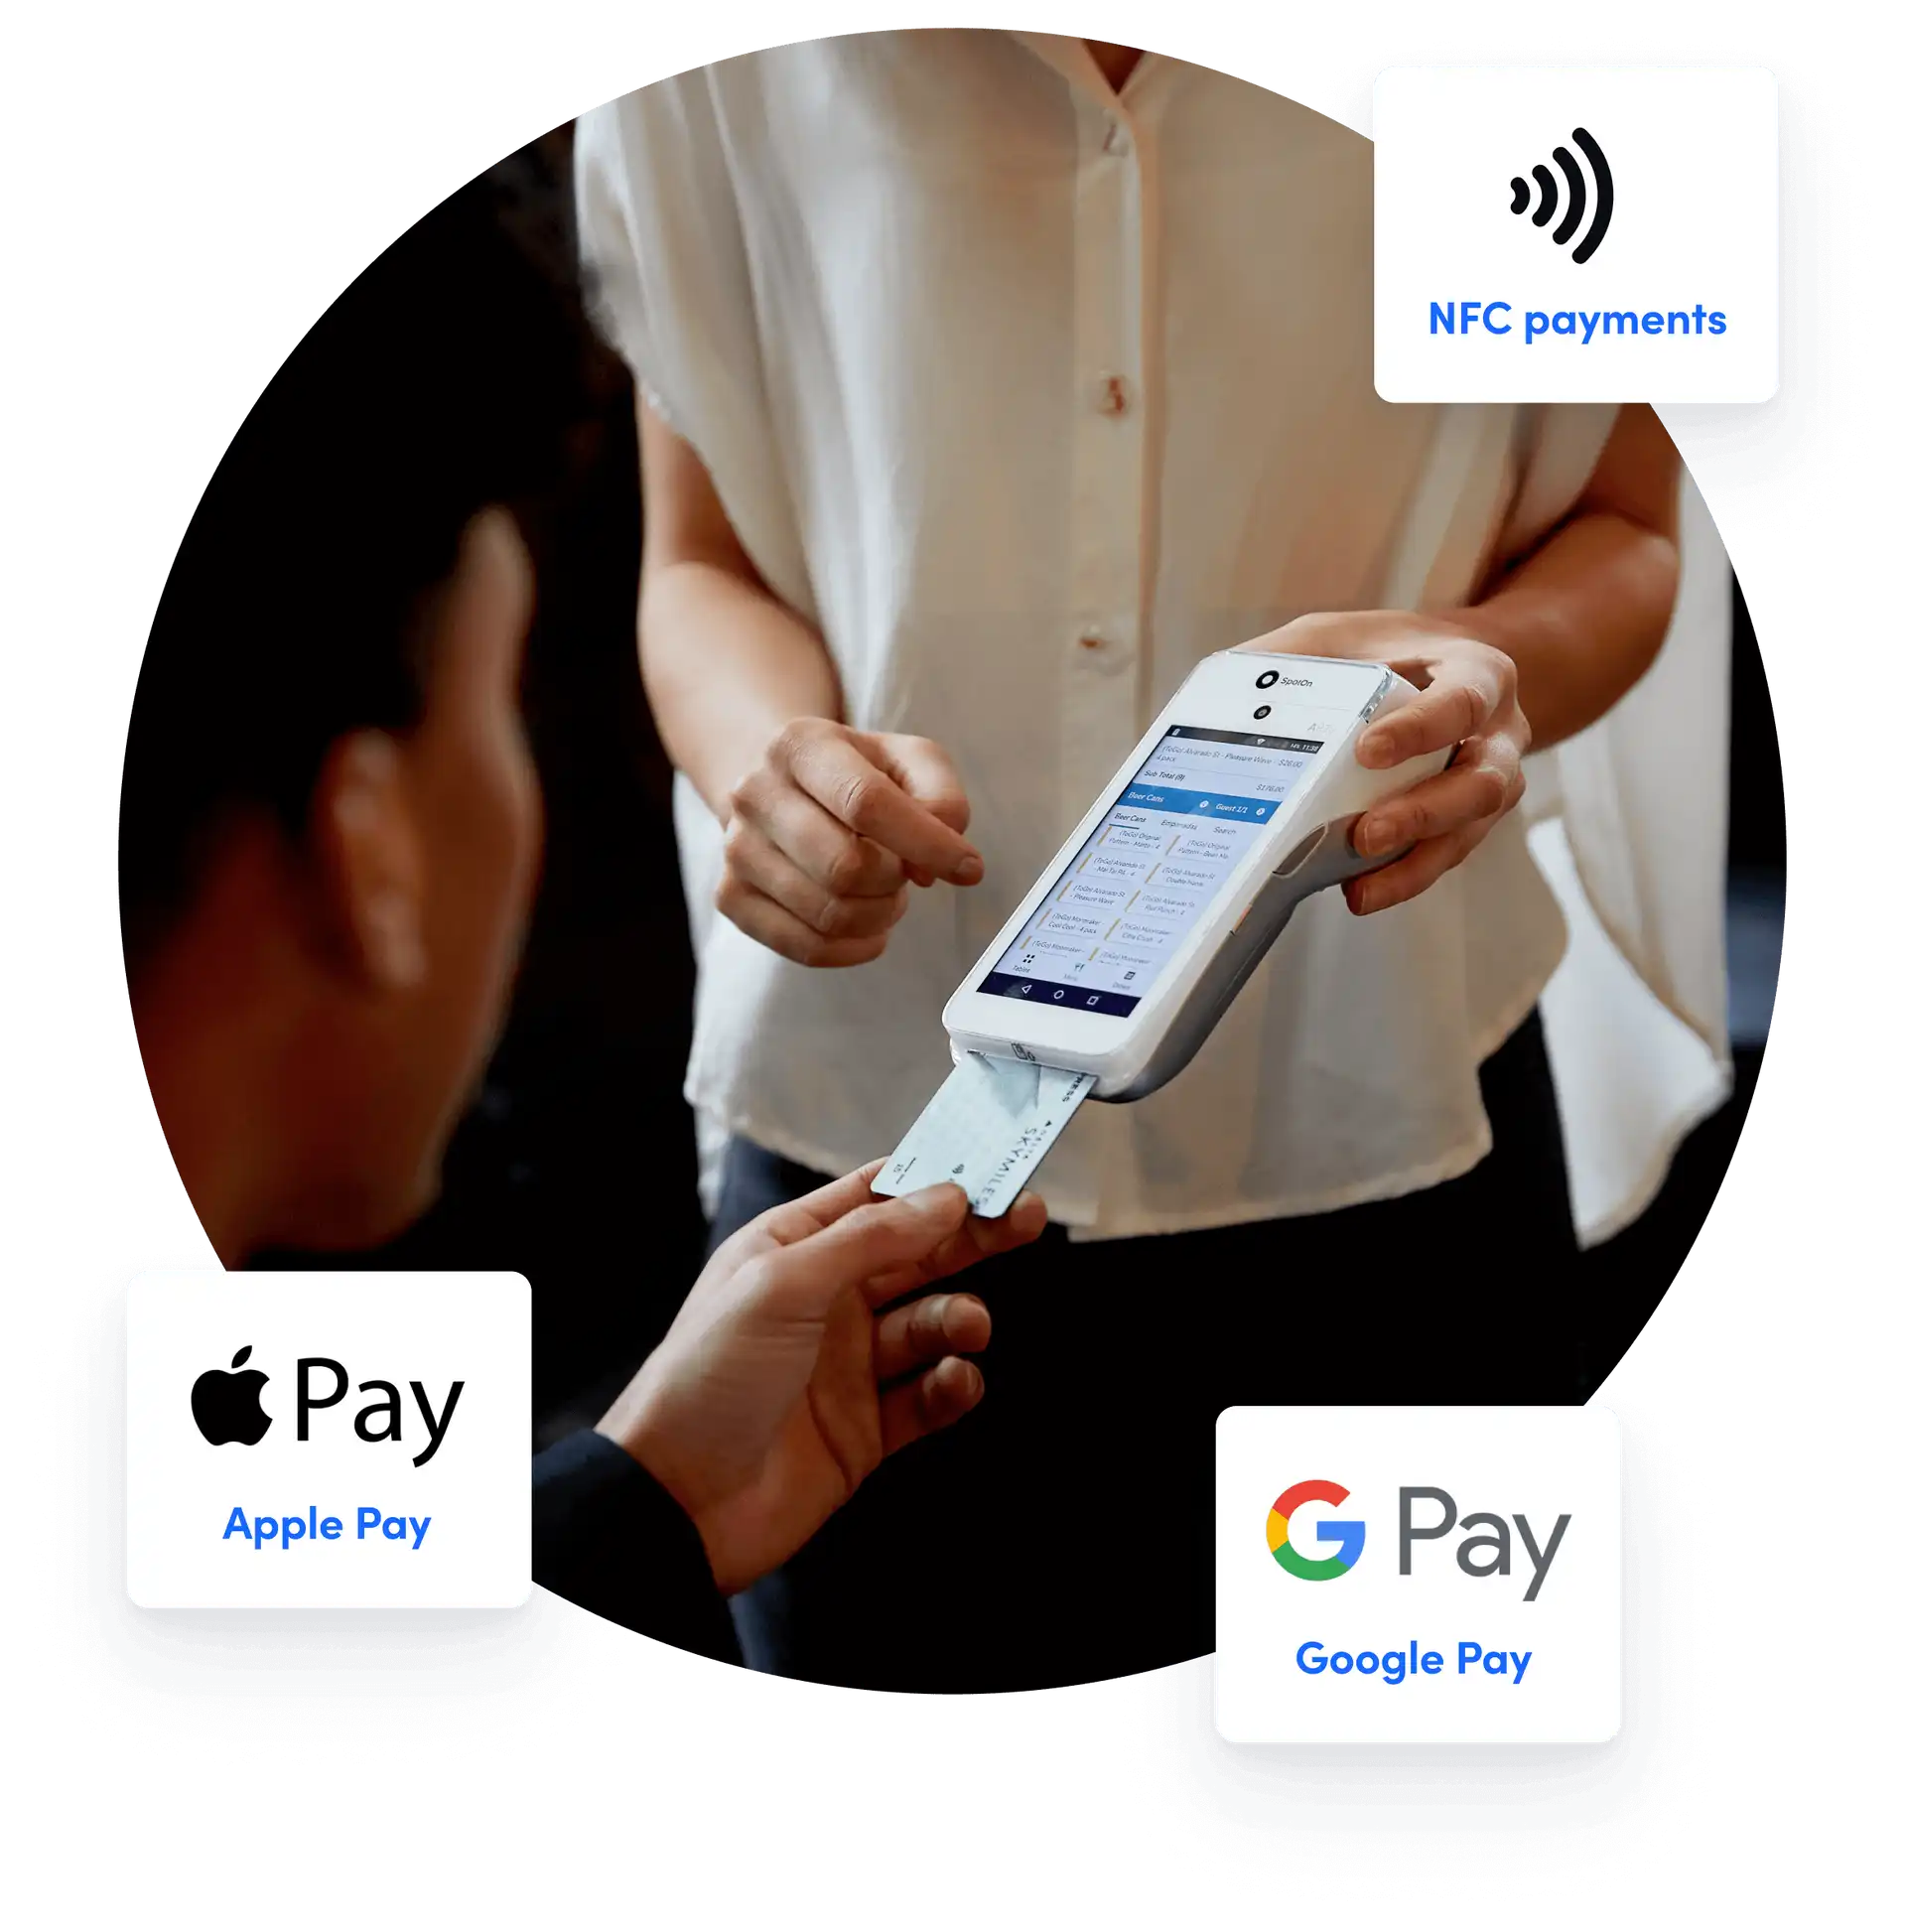 Accept payments your way.